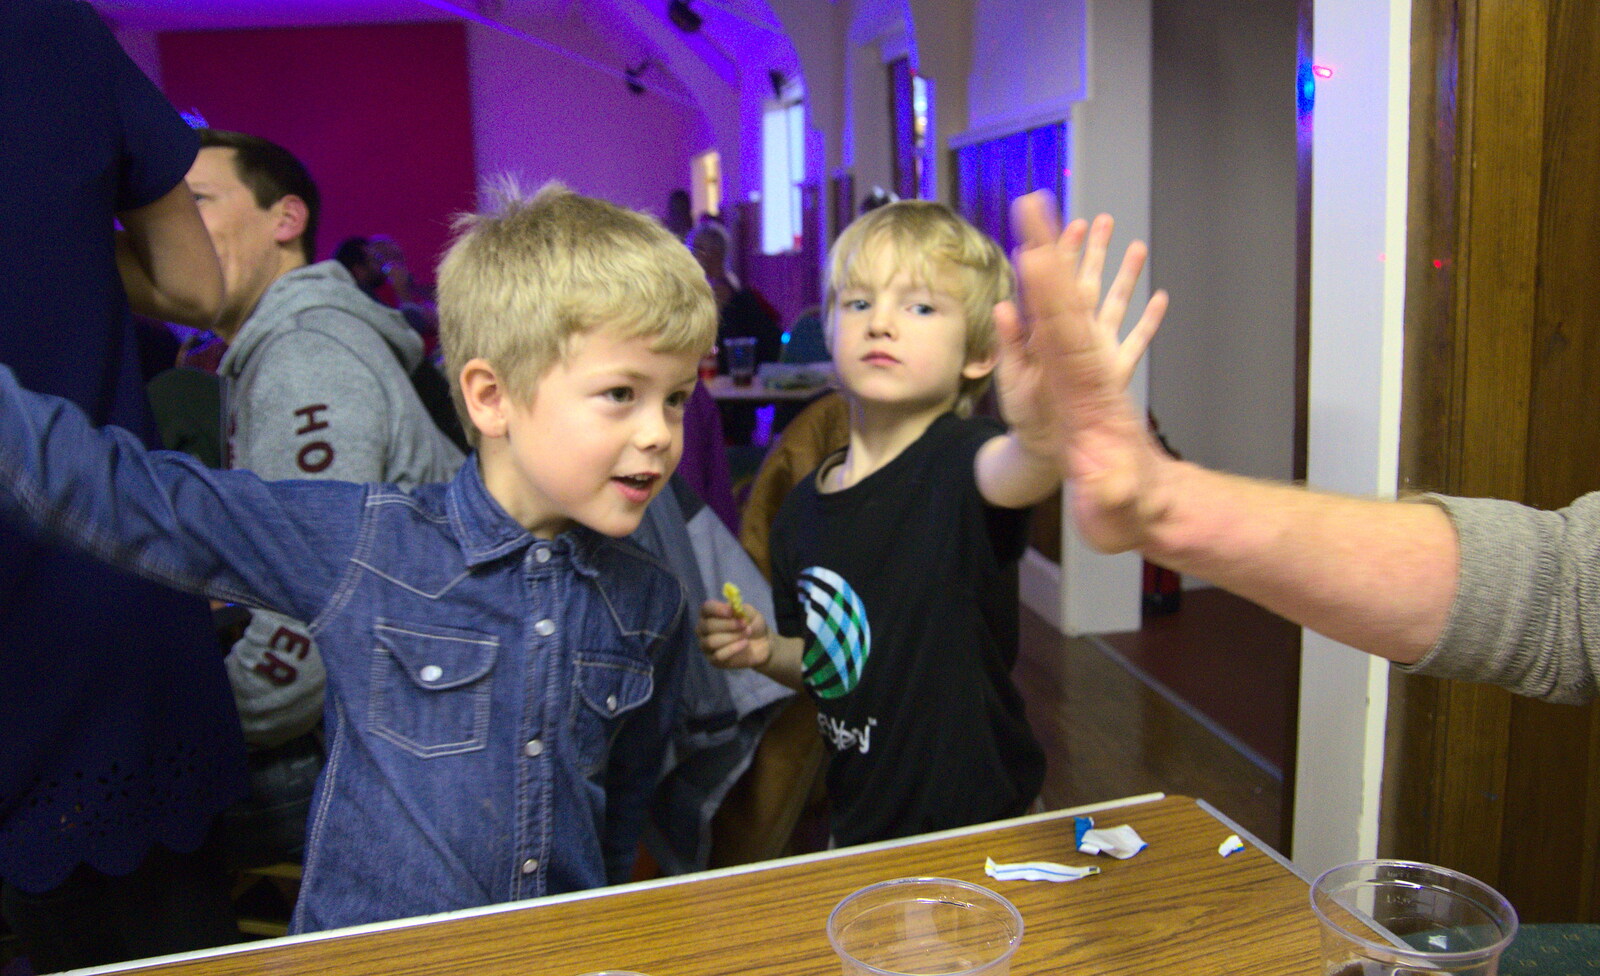 Jack and Harry do high-fives with Wavy from Bill's Birthday, The Lophams Village Hall, Norfolk - 9th December 2017